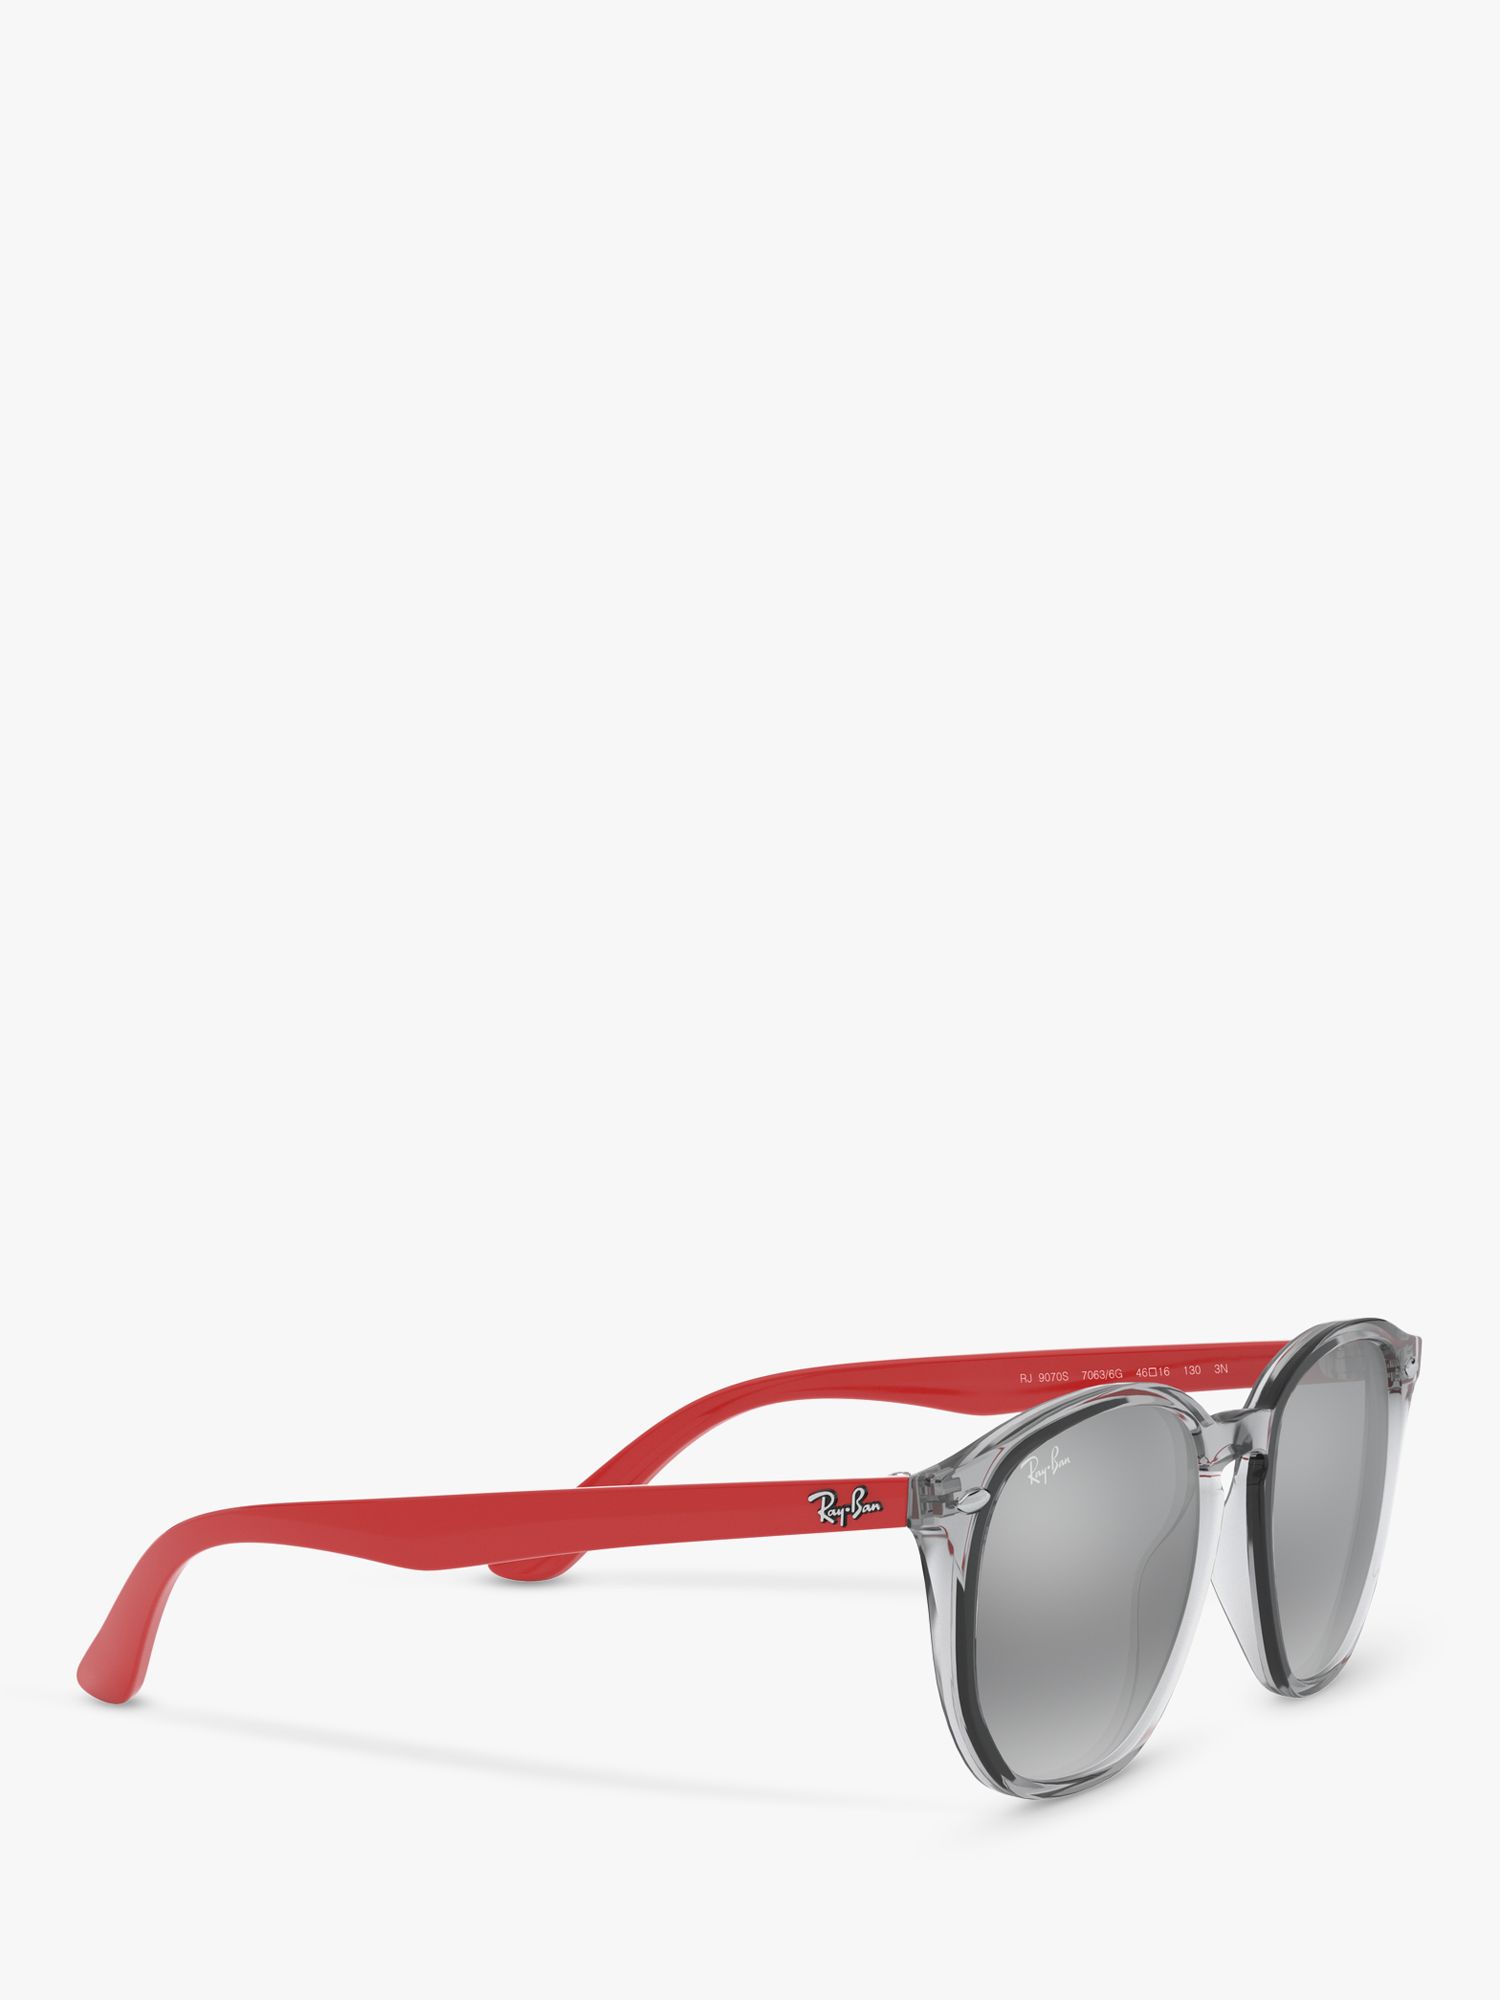 Buy Ray-Ban Junior RJ9070S Oval Sunglasses Online at johnlewis.com